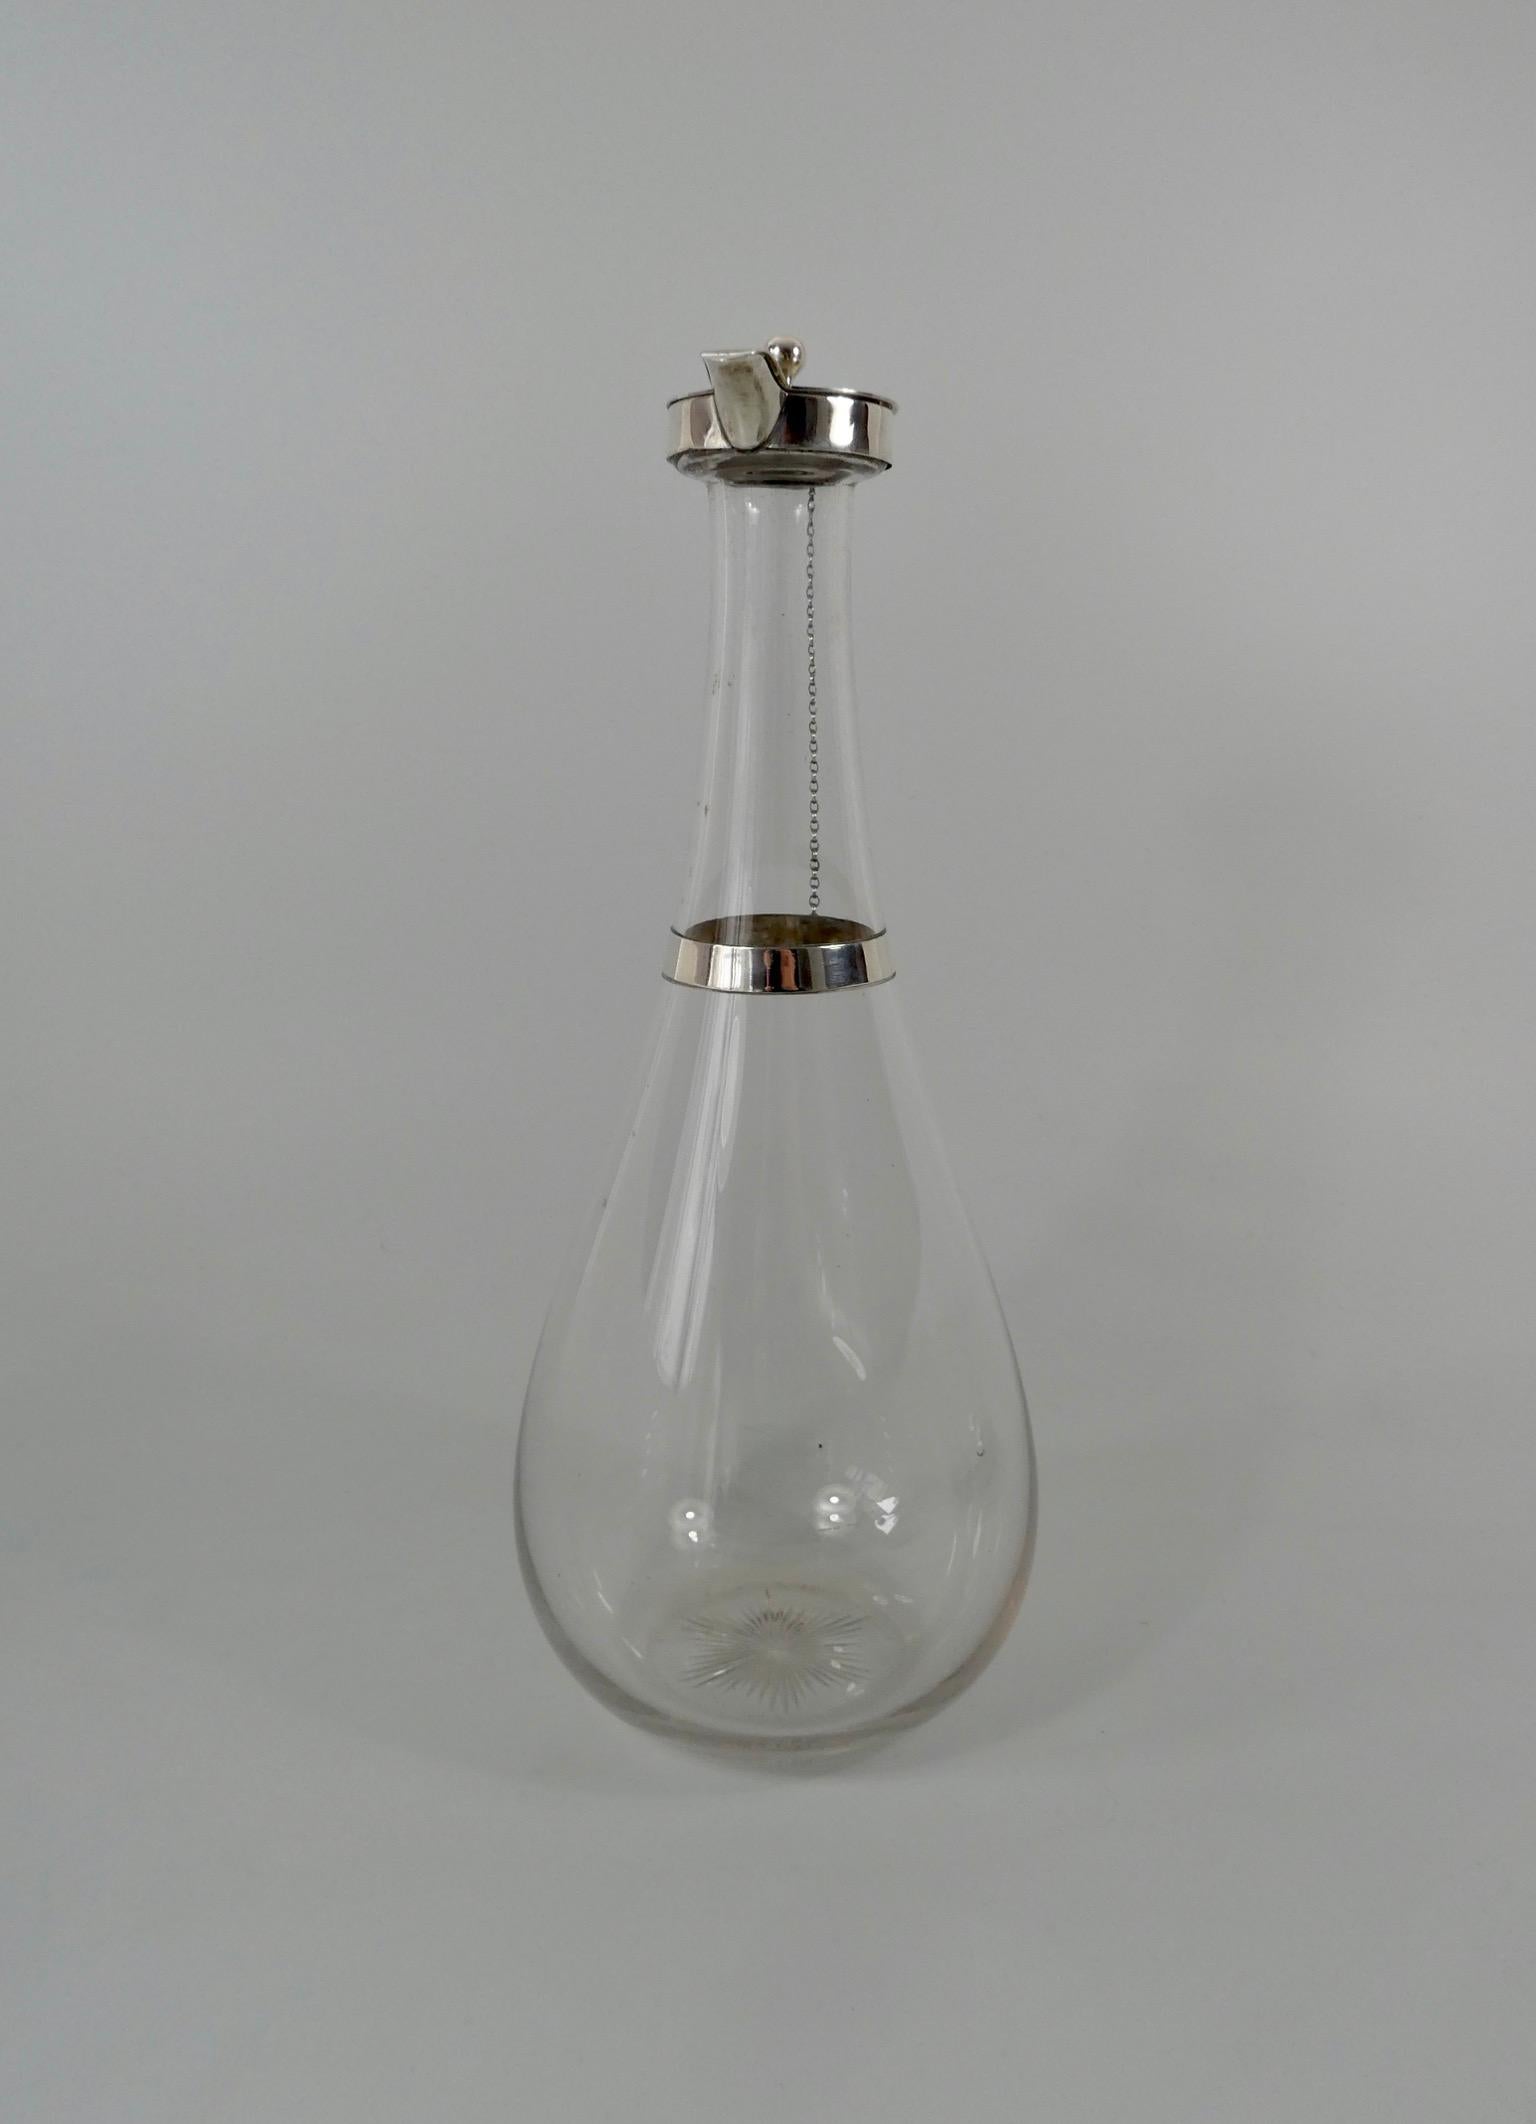 English Christopher Dresser Designed Silver Mounted Glass Decanter, Dated 1879